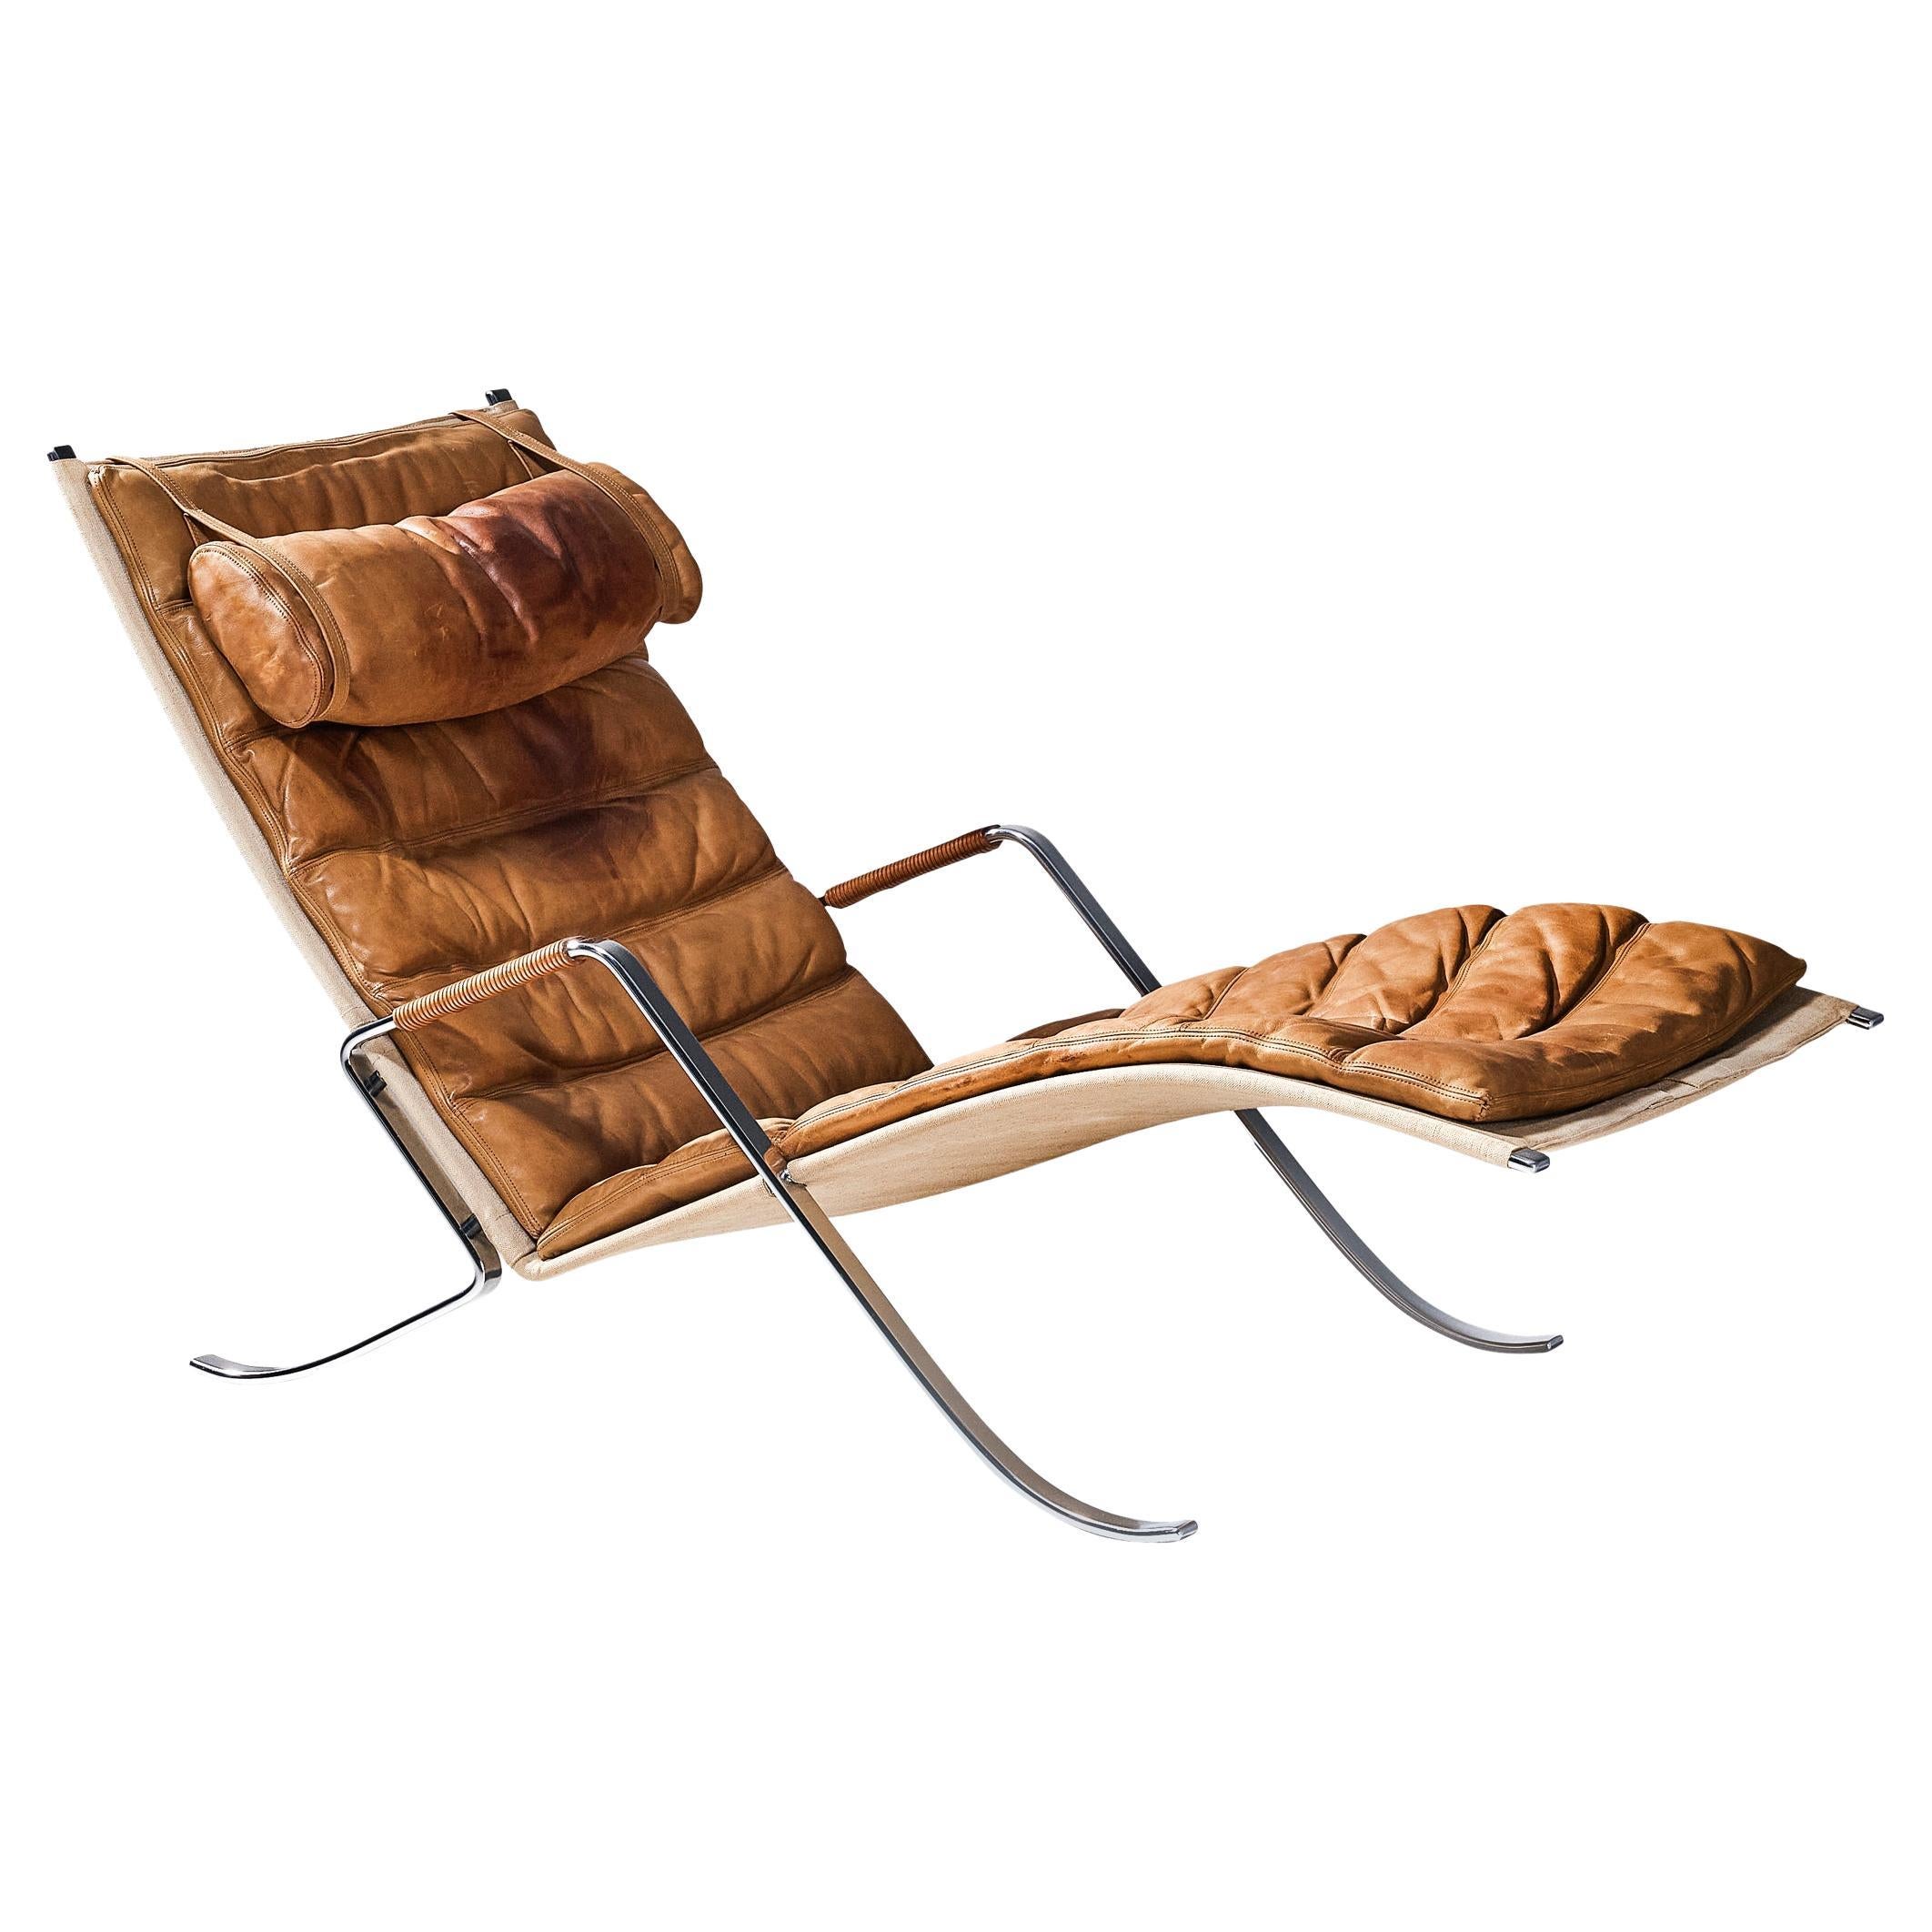 Kastholm & Fabricius Early 'Grasshopper' Lounge Chair in Cognac Leather For Sale